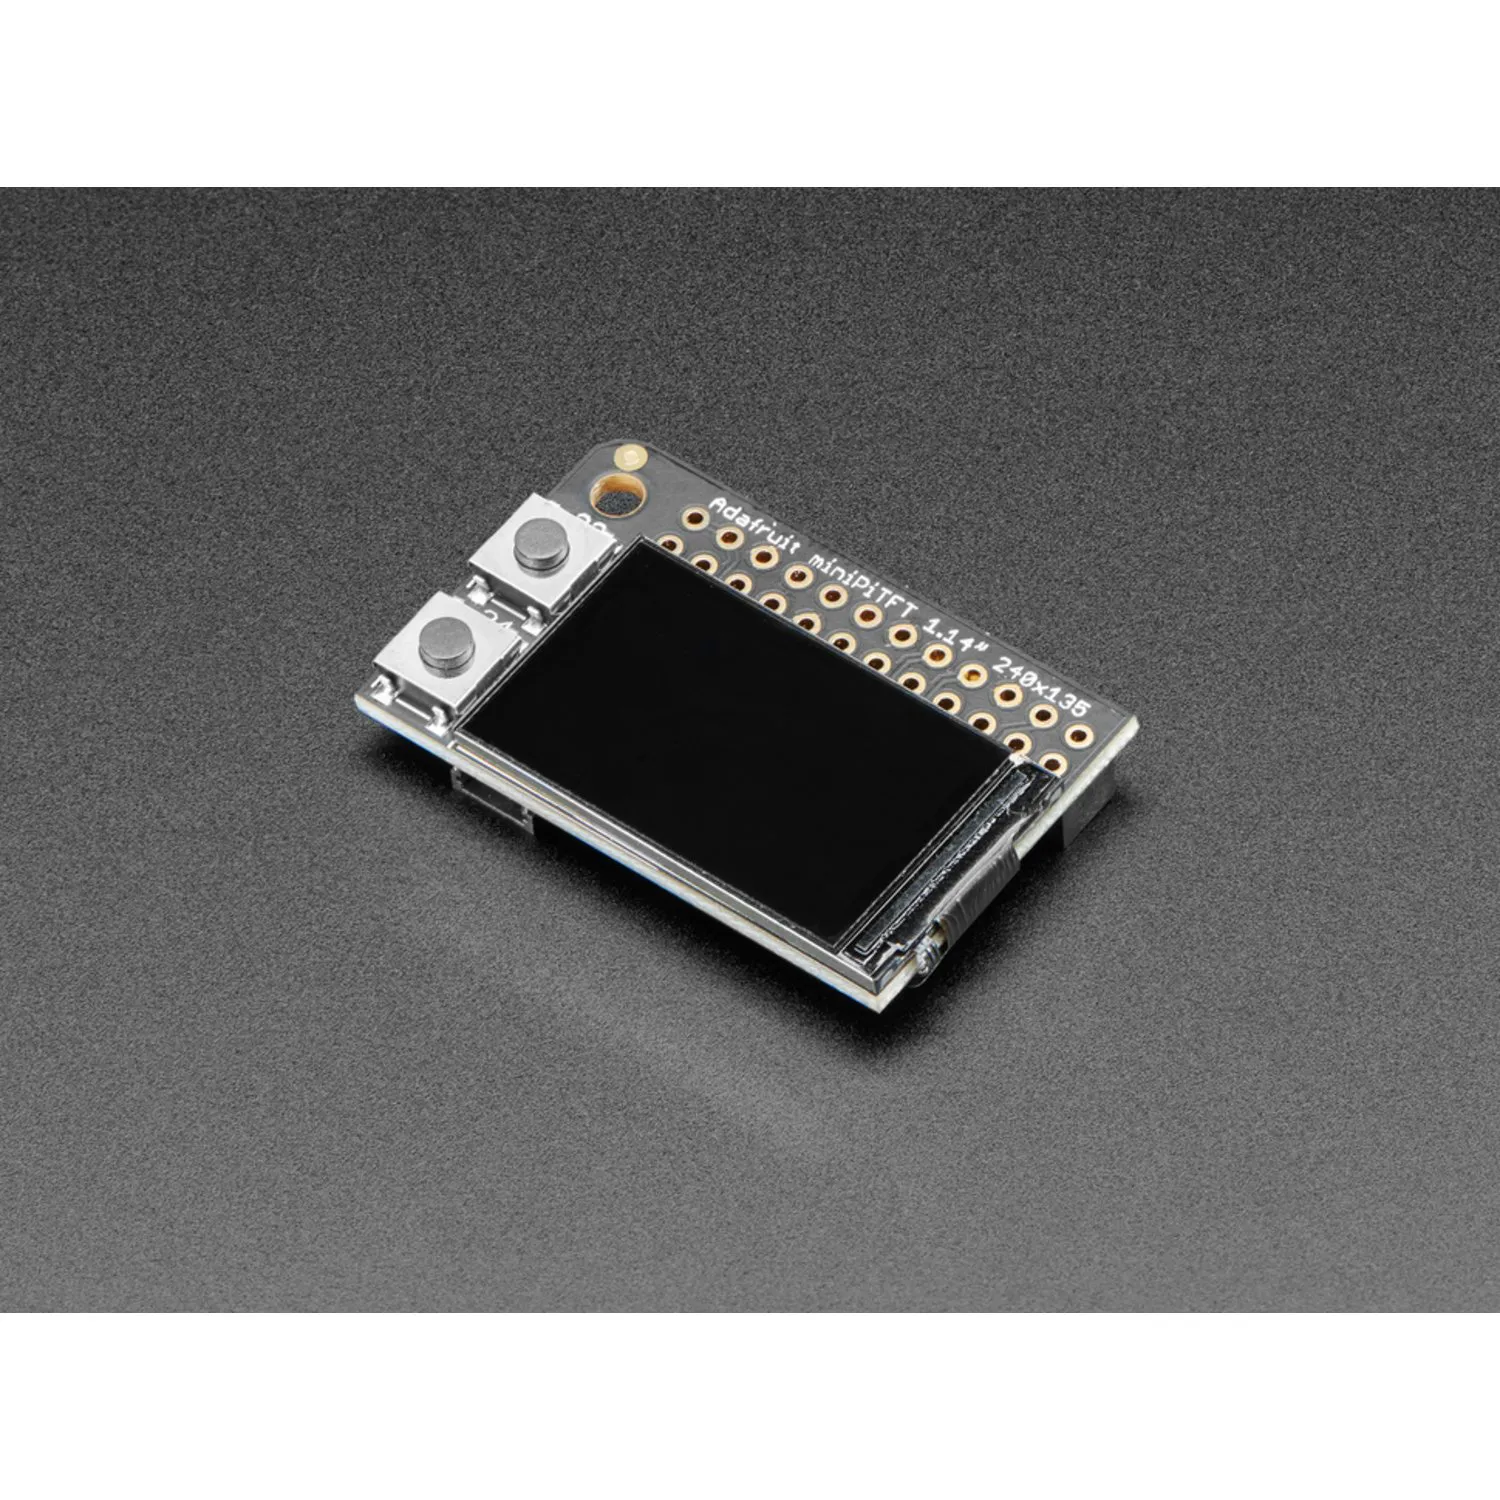 Photo of Adafruit Mini PiTFT - 135x240 Color TFT Add-on for Raspberry Pi